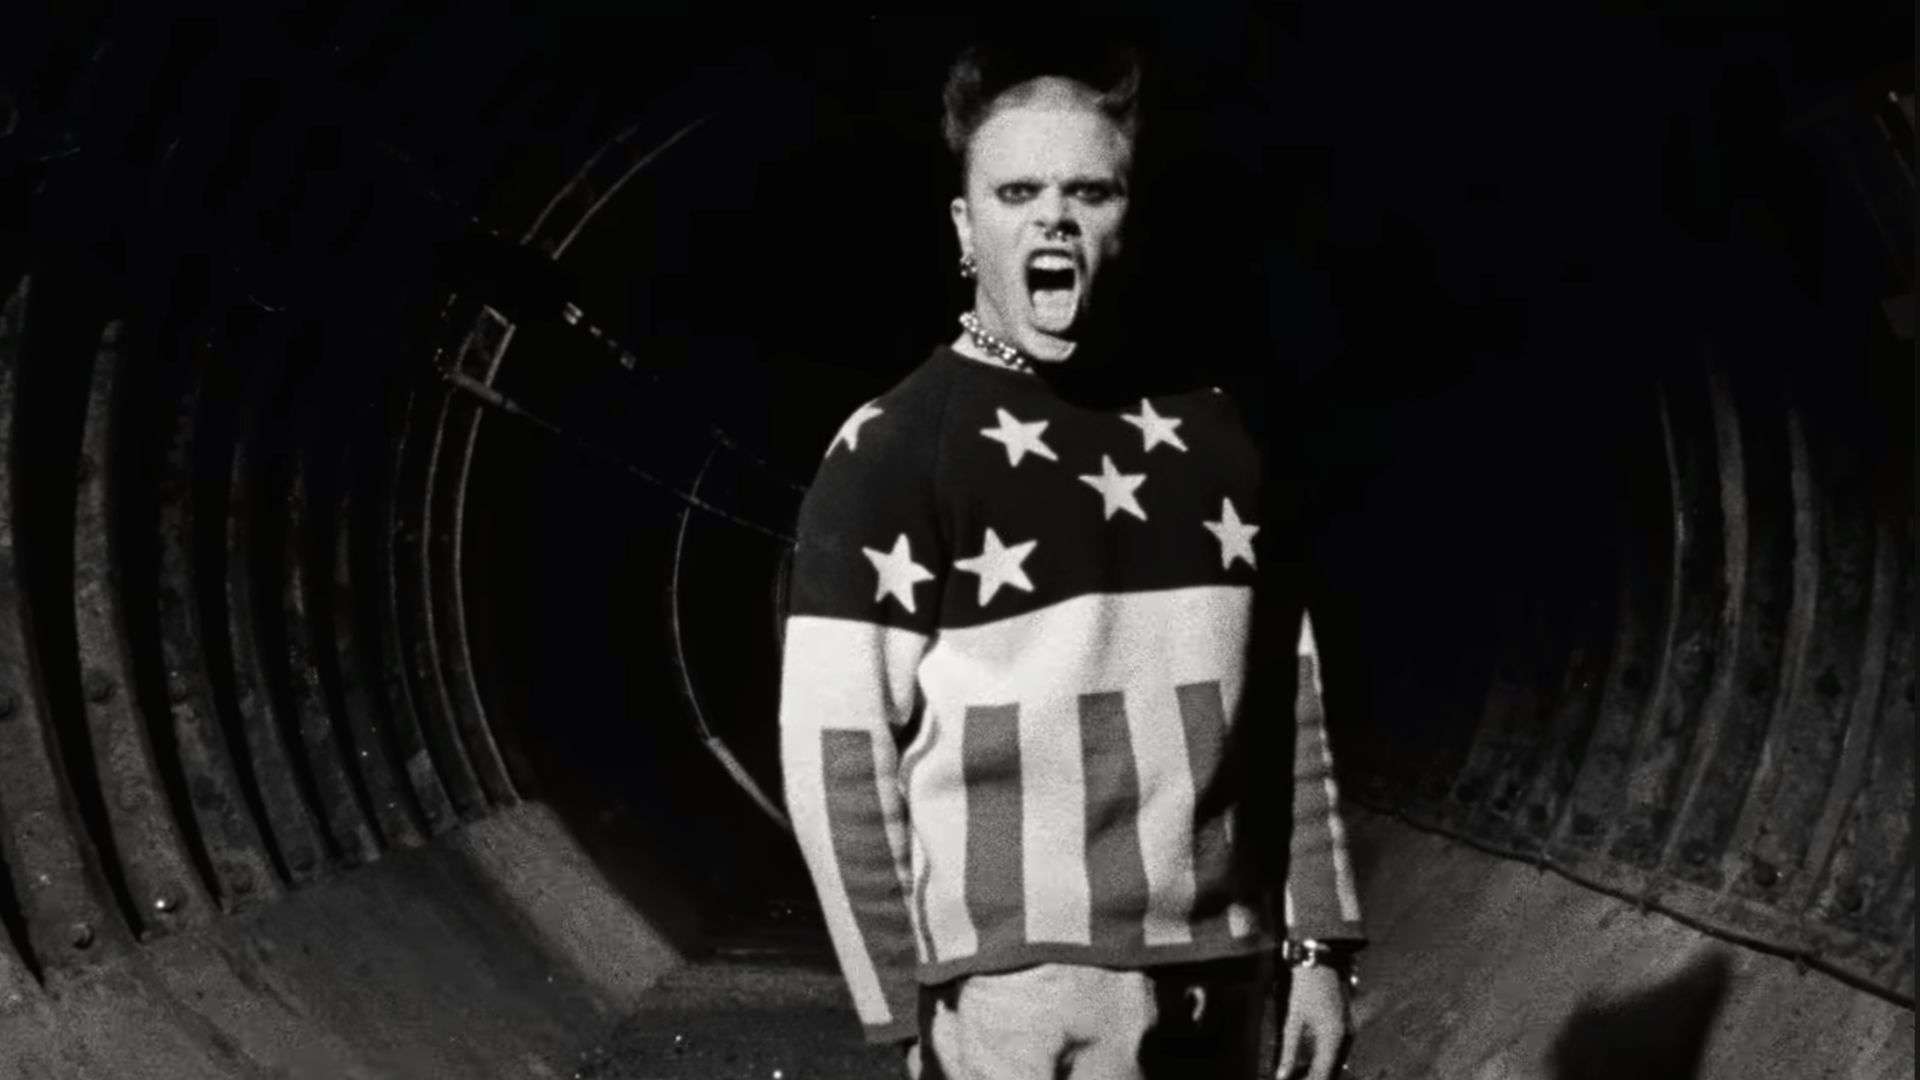 The Prodigy ‘Firestarter’: Looking Back At the Sonic Revolution of the 90s